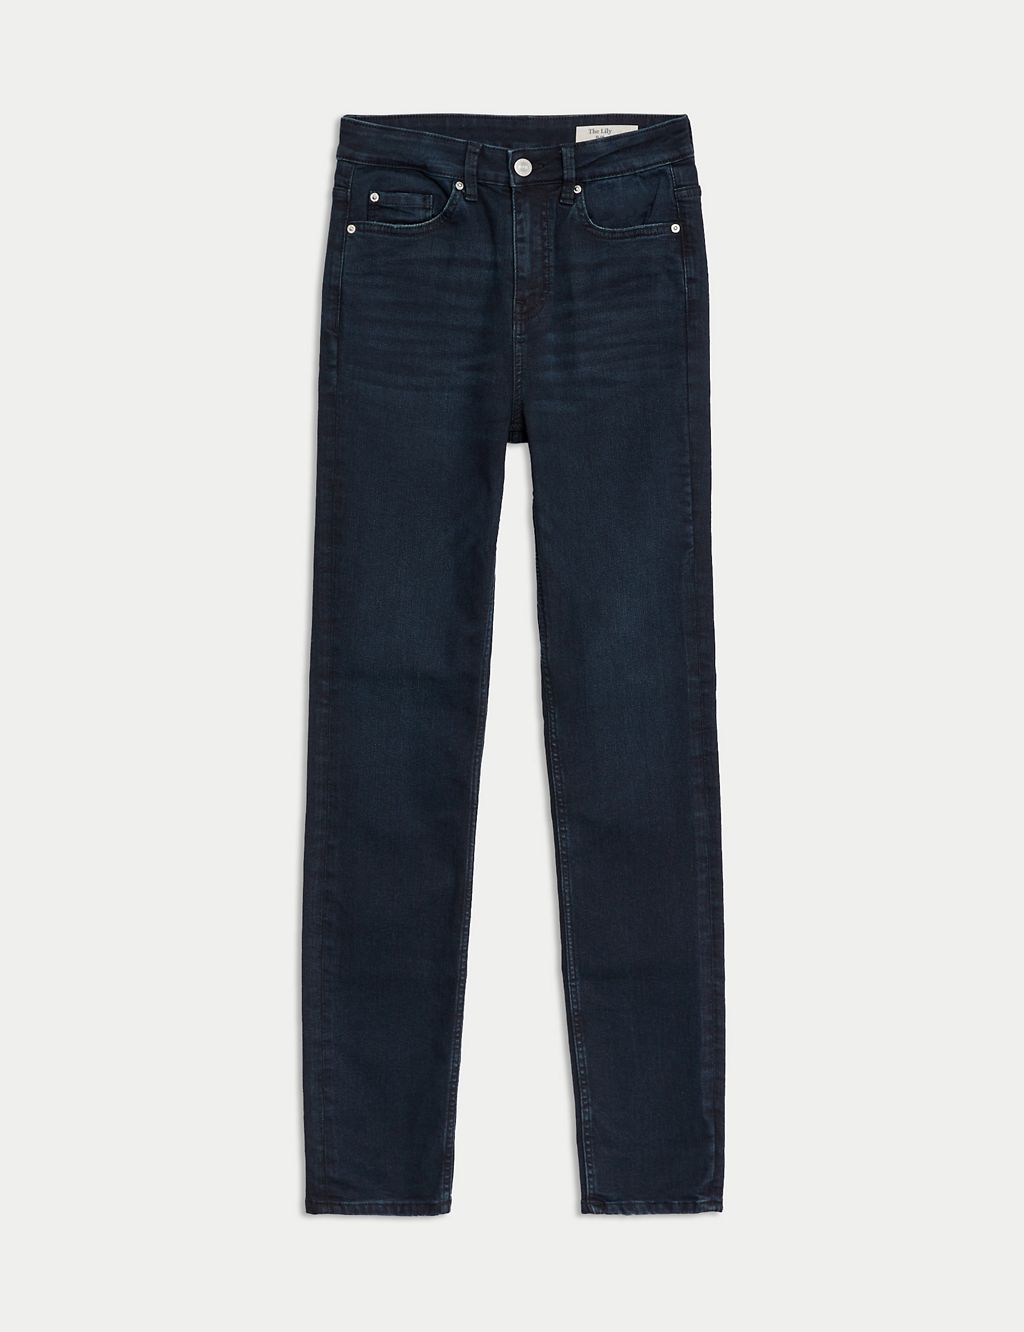 Lily Slim Fit Jeans with Stretch 1 of 5